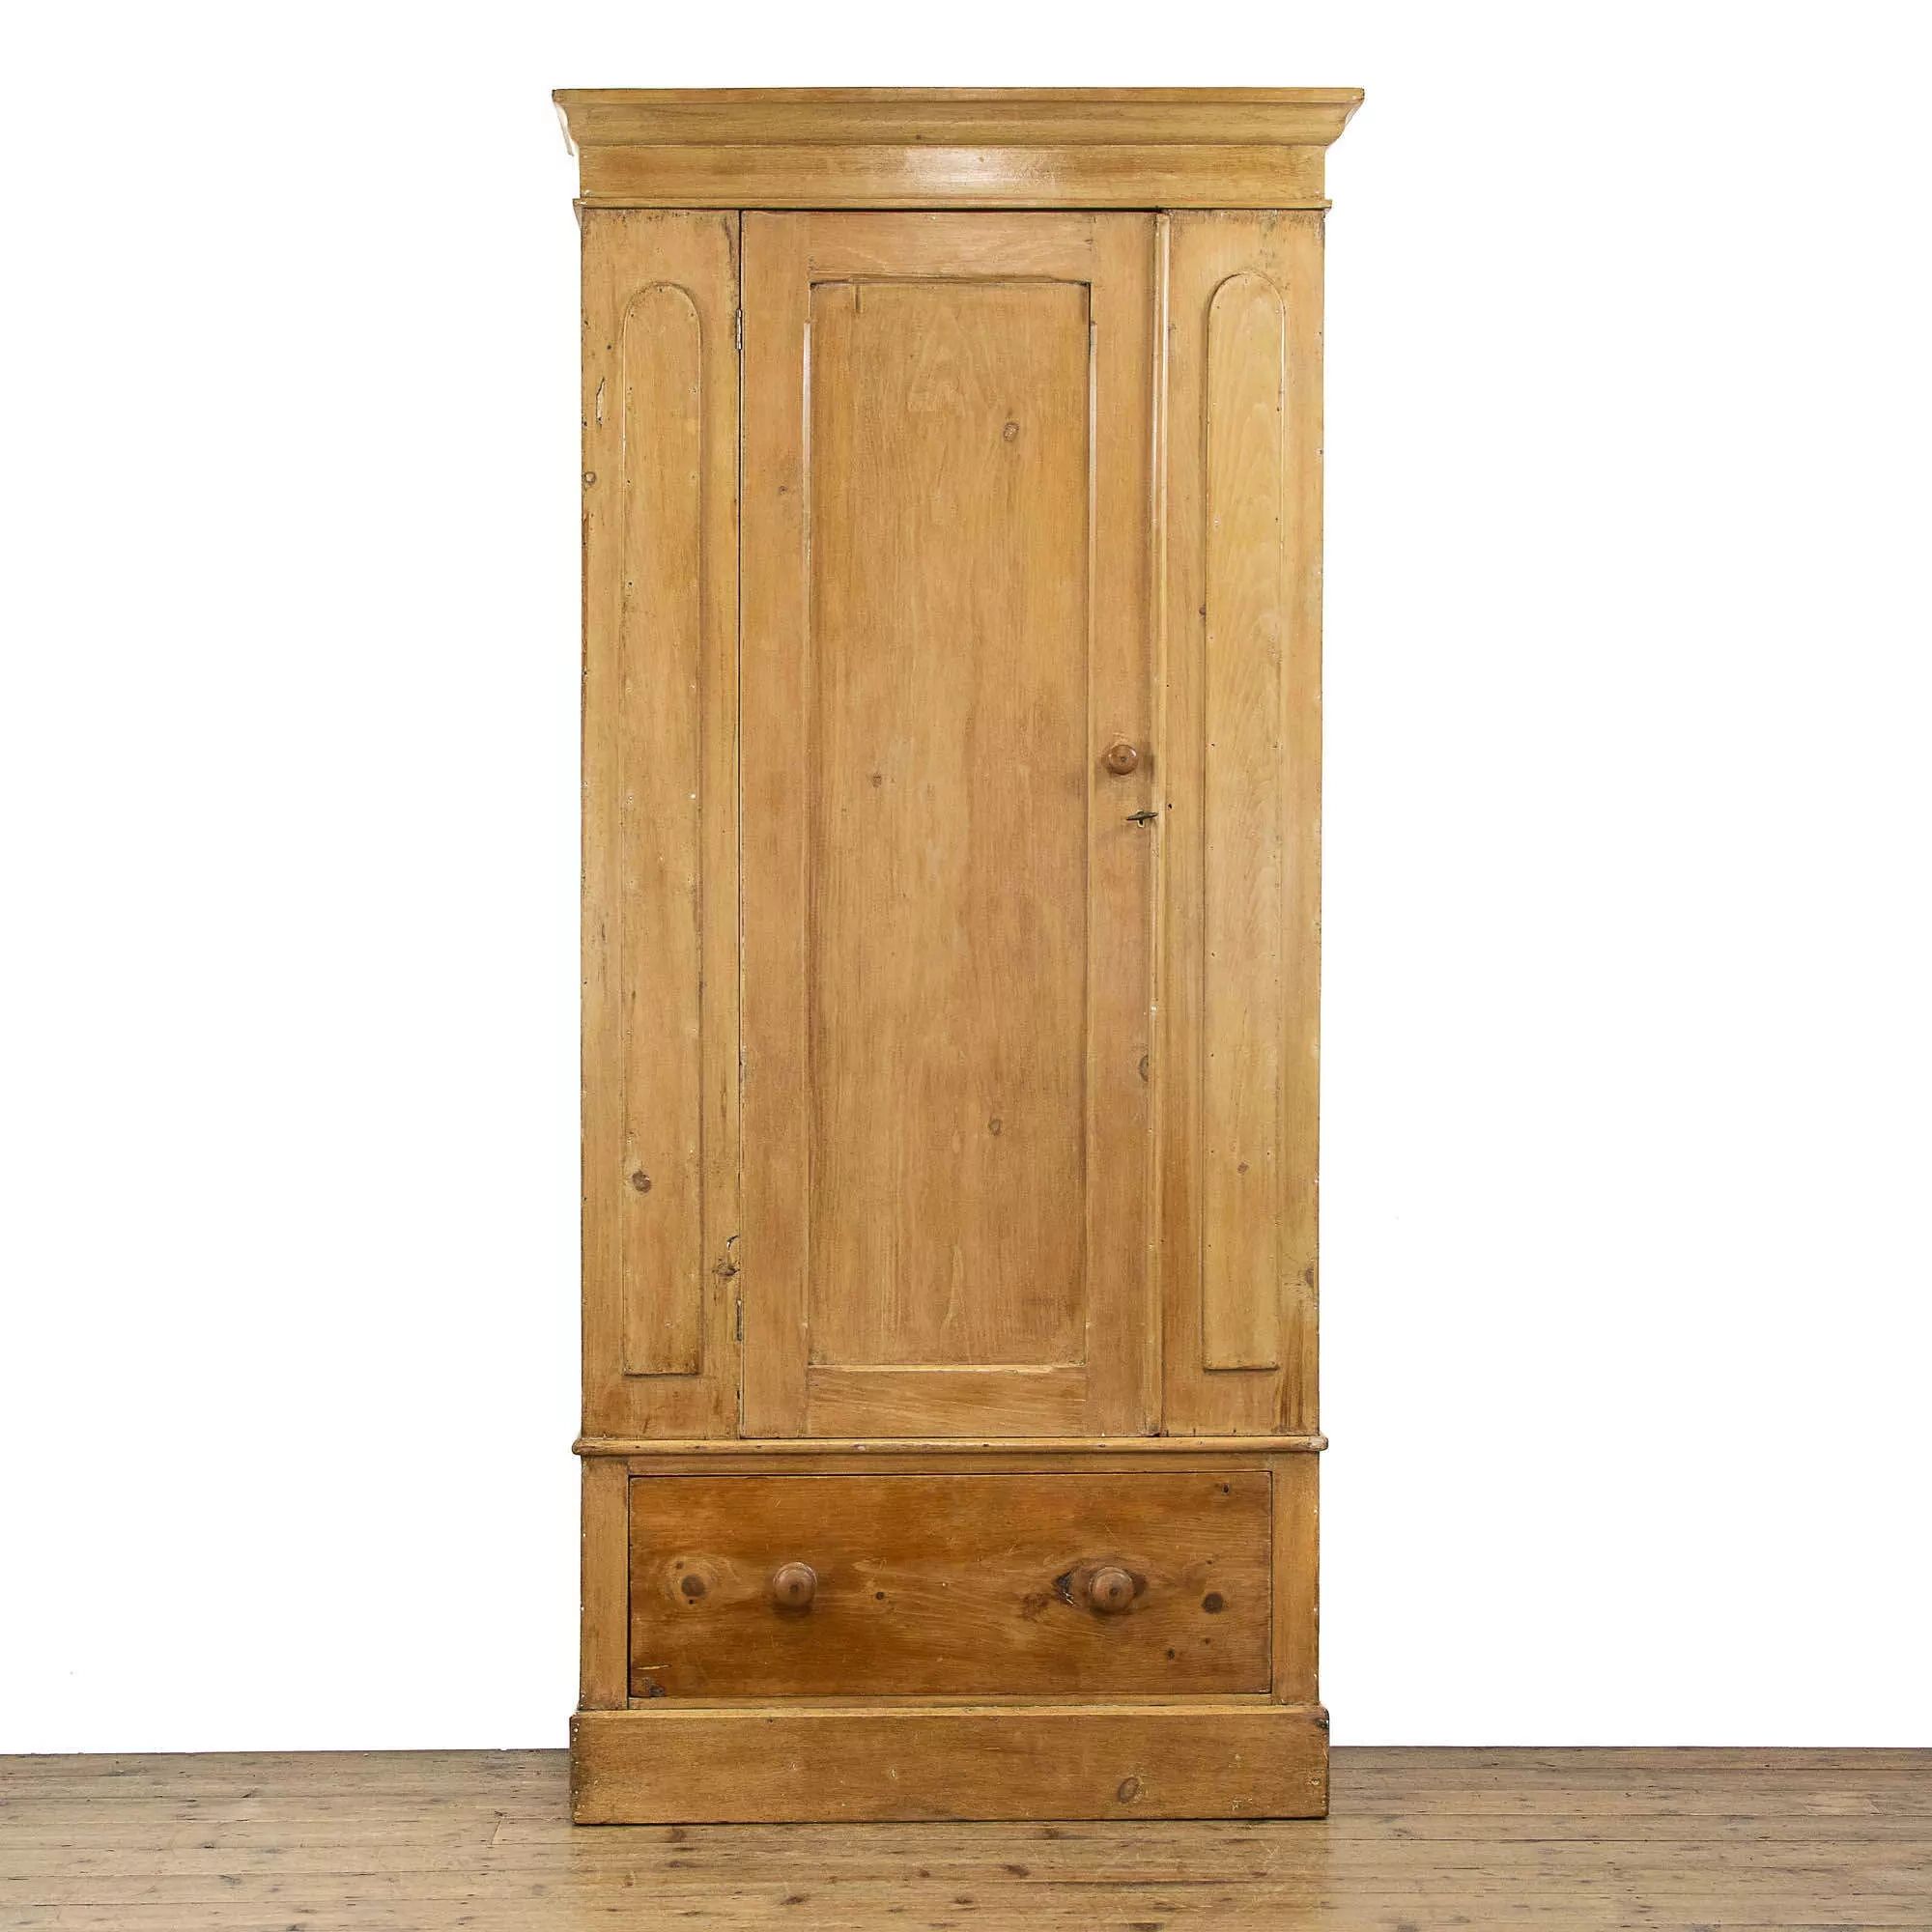 Victorian Stripped Pine Single Wardrobe In Antique Wardrobes & Armoires Regarding Antique Single Wardrobes (View 14 of 20)